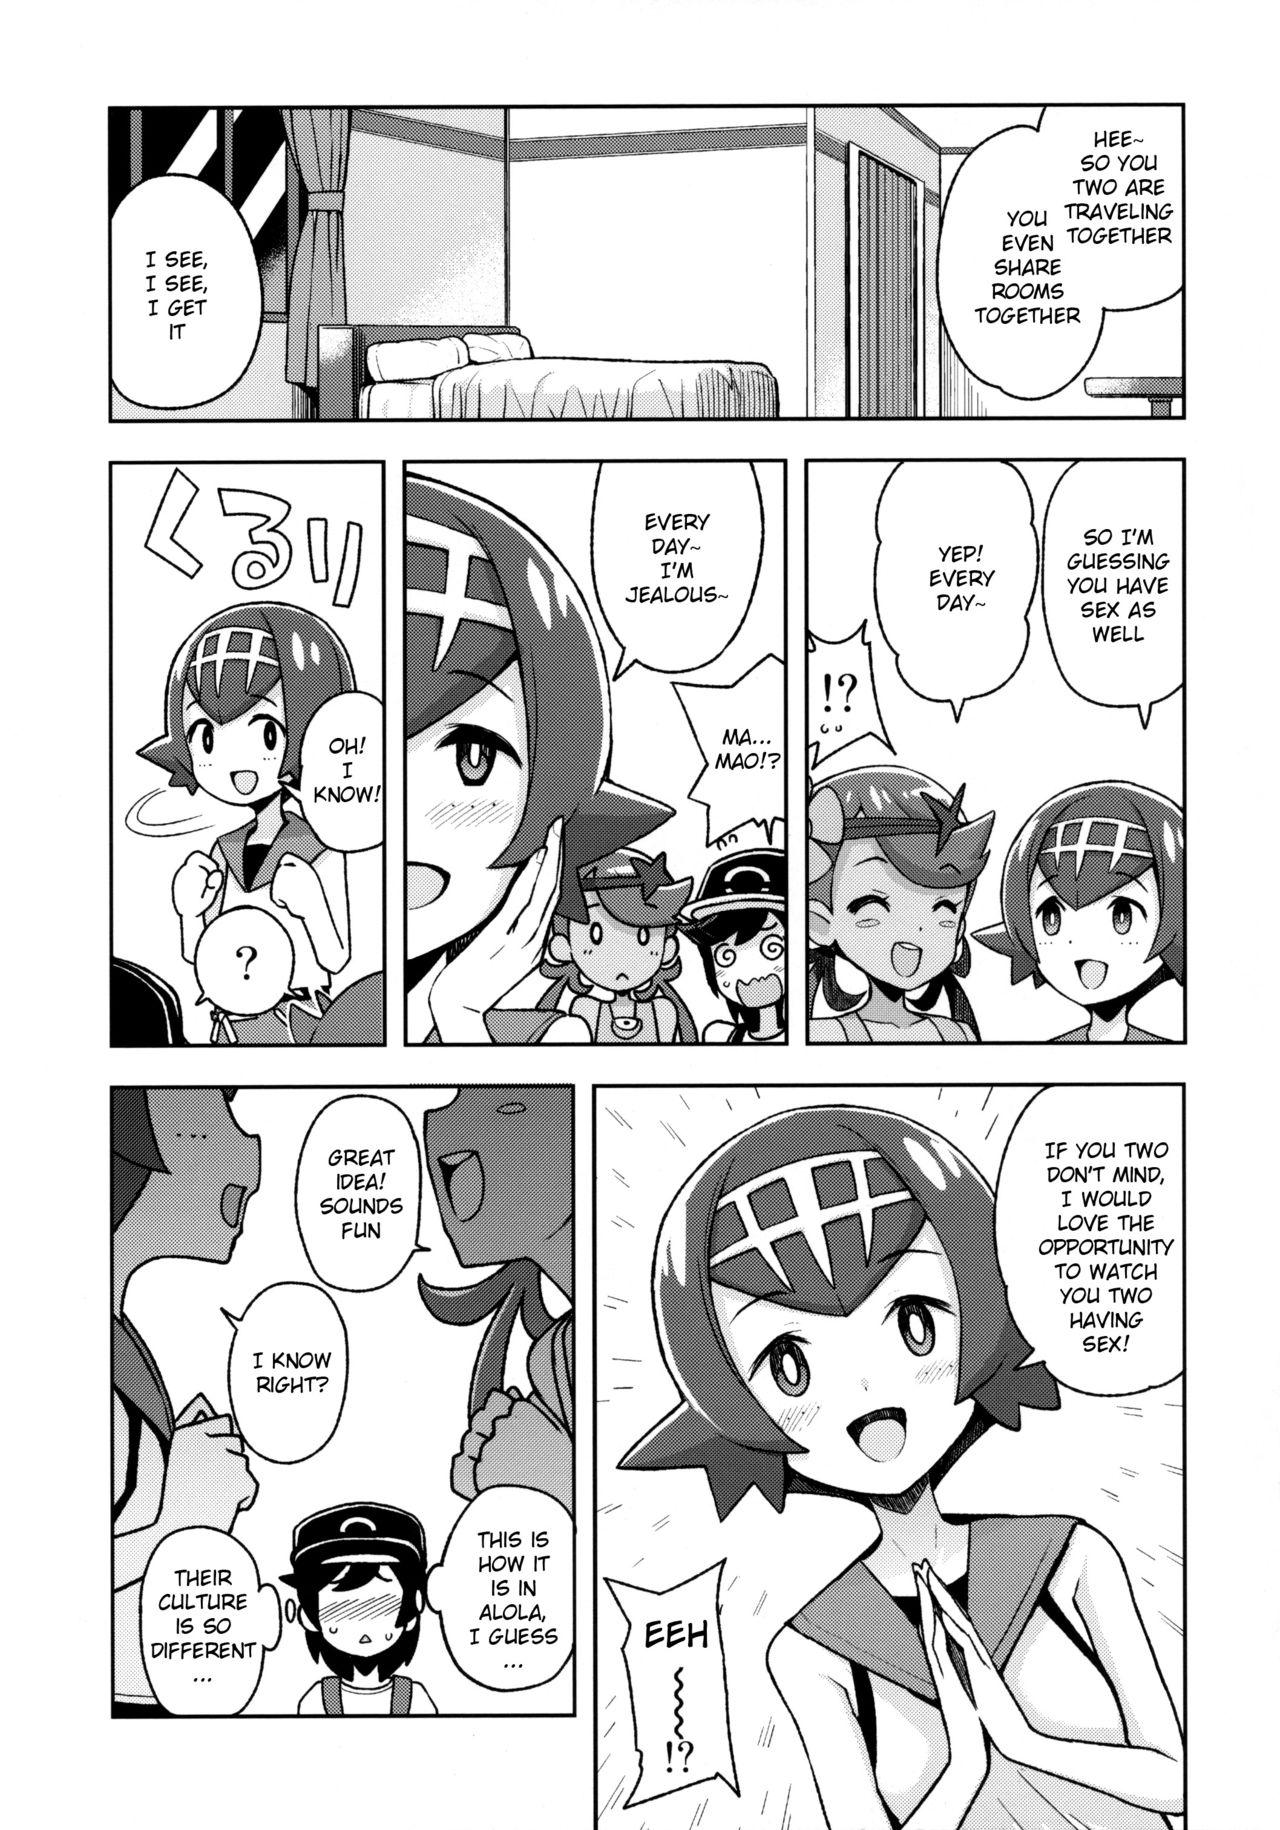 Gay Rimming MAO FRIENDS2 - Pokemon | pocket monsters Police - Page 4